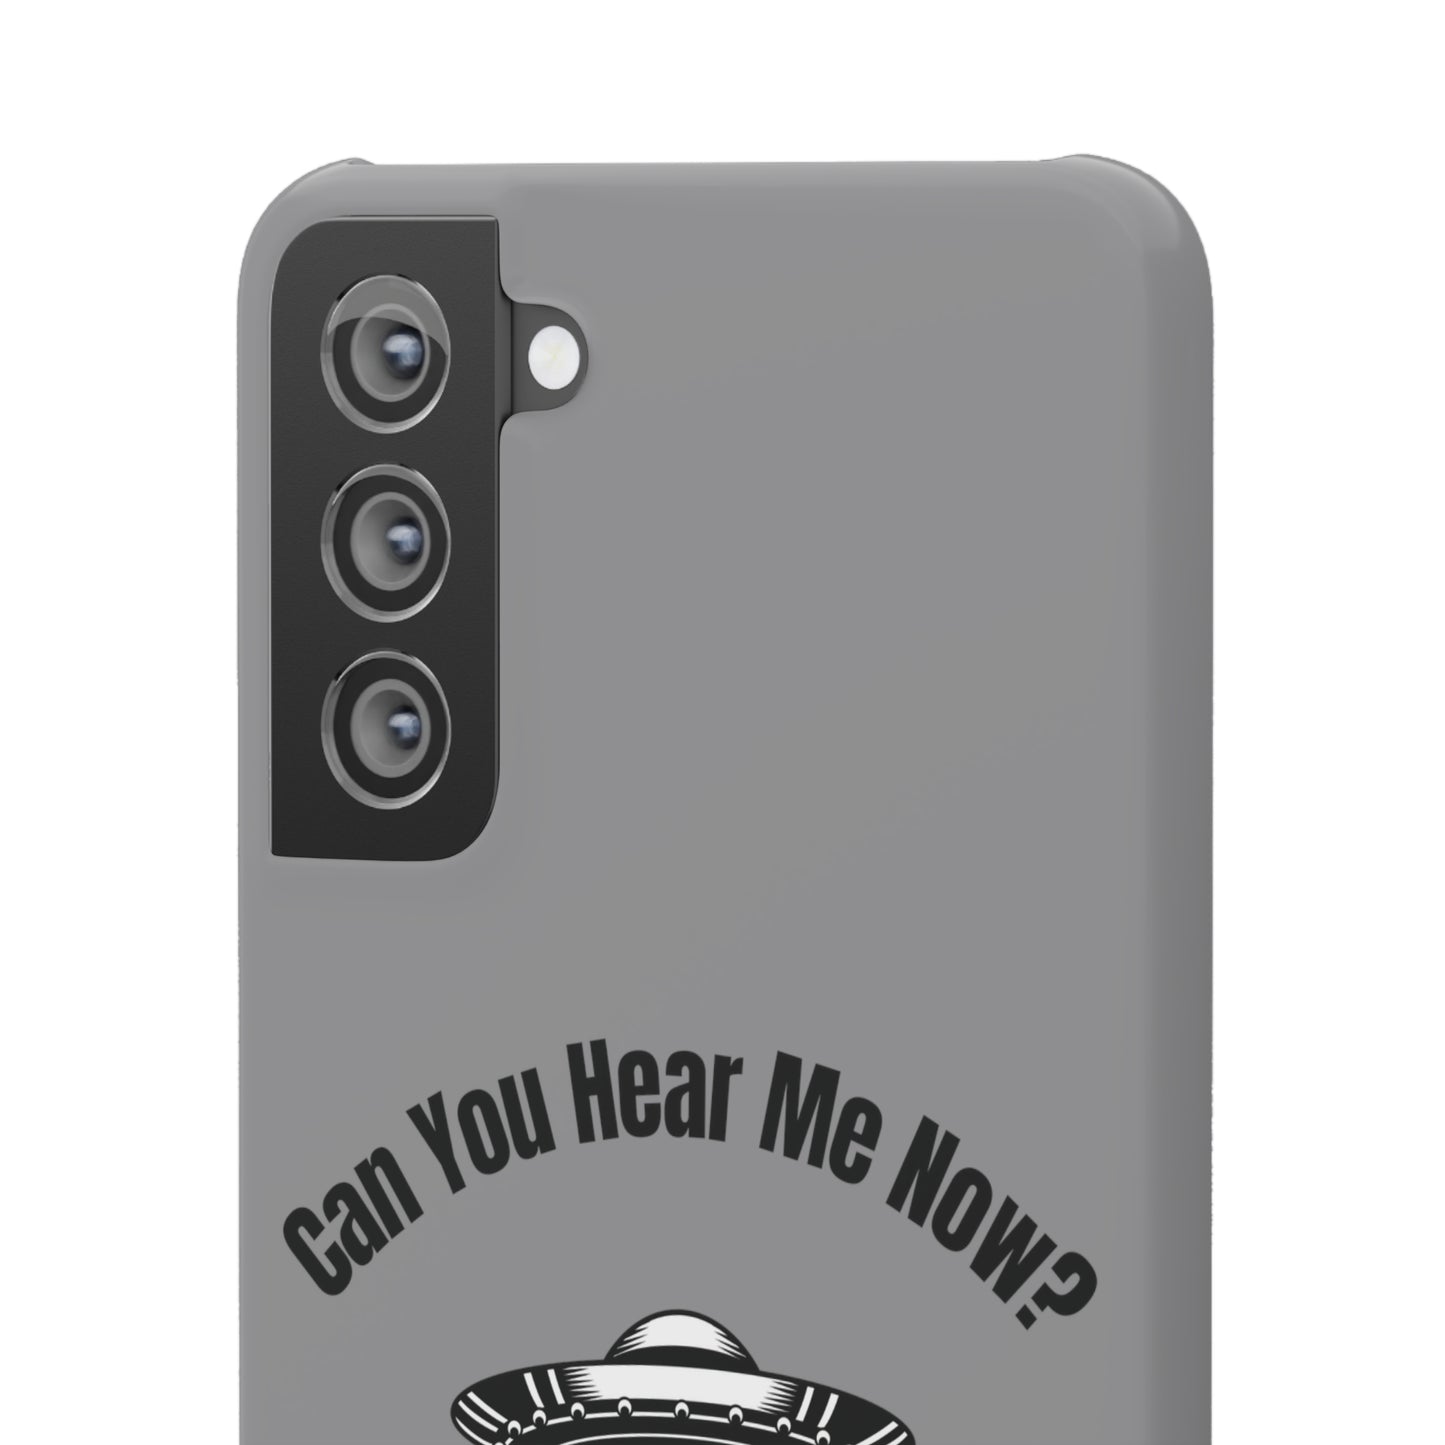 Can You Hear Me Now! Snap Cases